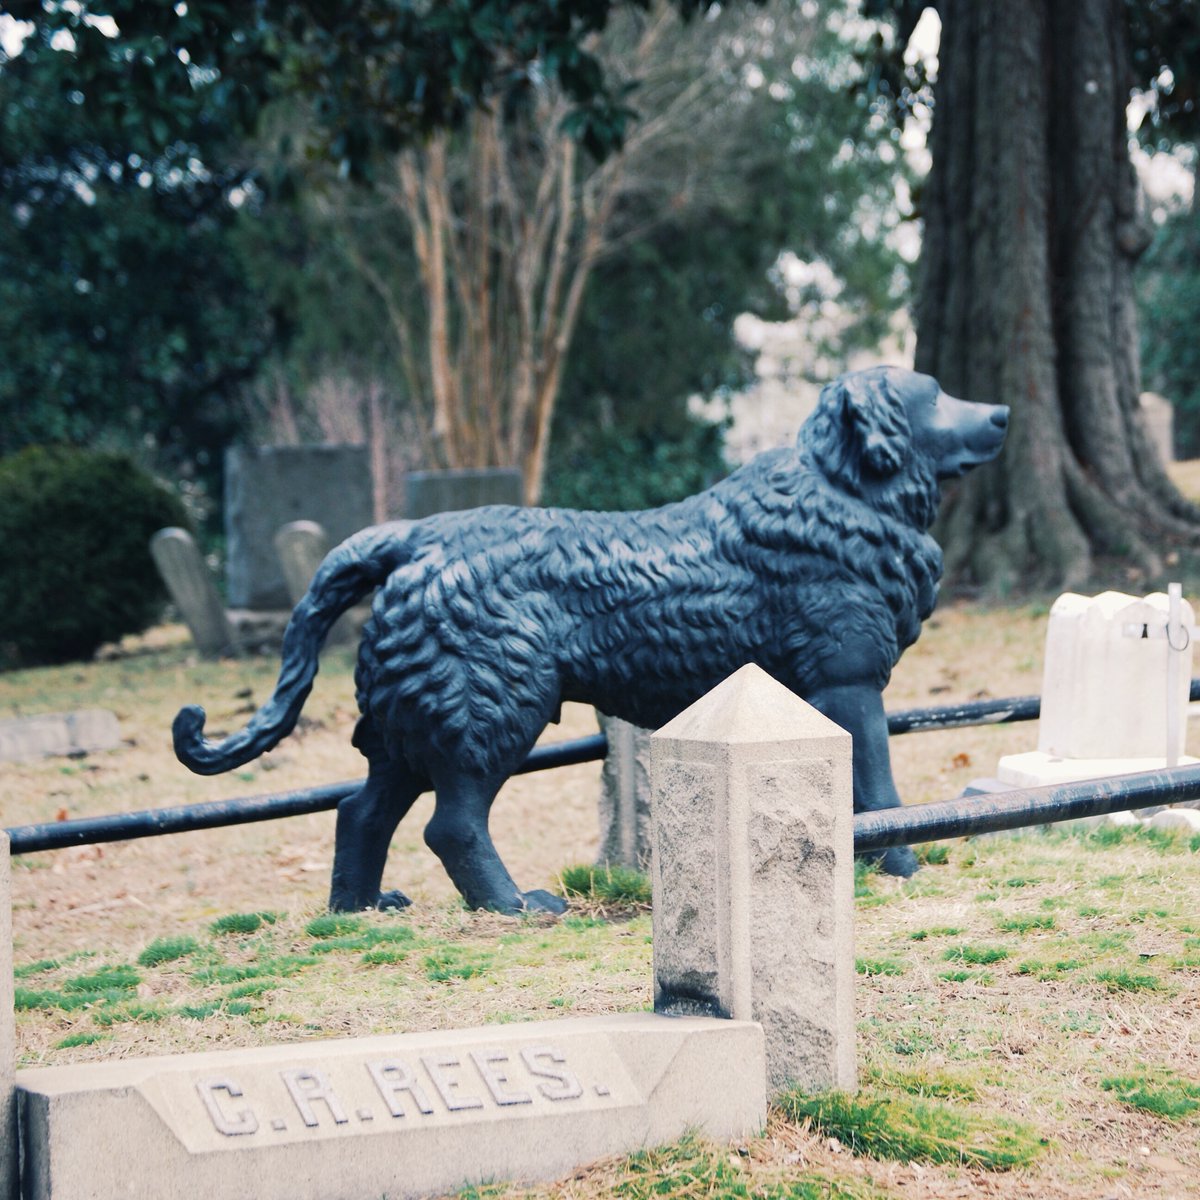 One of the most well-known monuments in Hollywood Cemetery is a cast-iron Newfoundland dog. The statue stands guard over the grave of a young girl who died in 1862. See this monument and more on our Highlights Tour hollywoodcemetery.org/visit/virtual-…